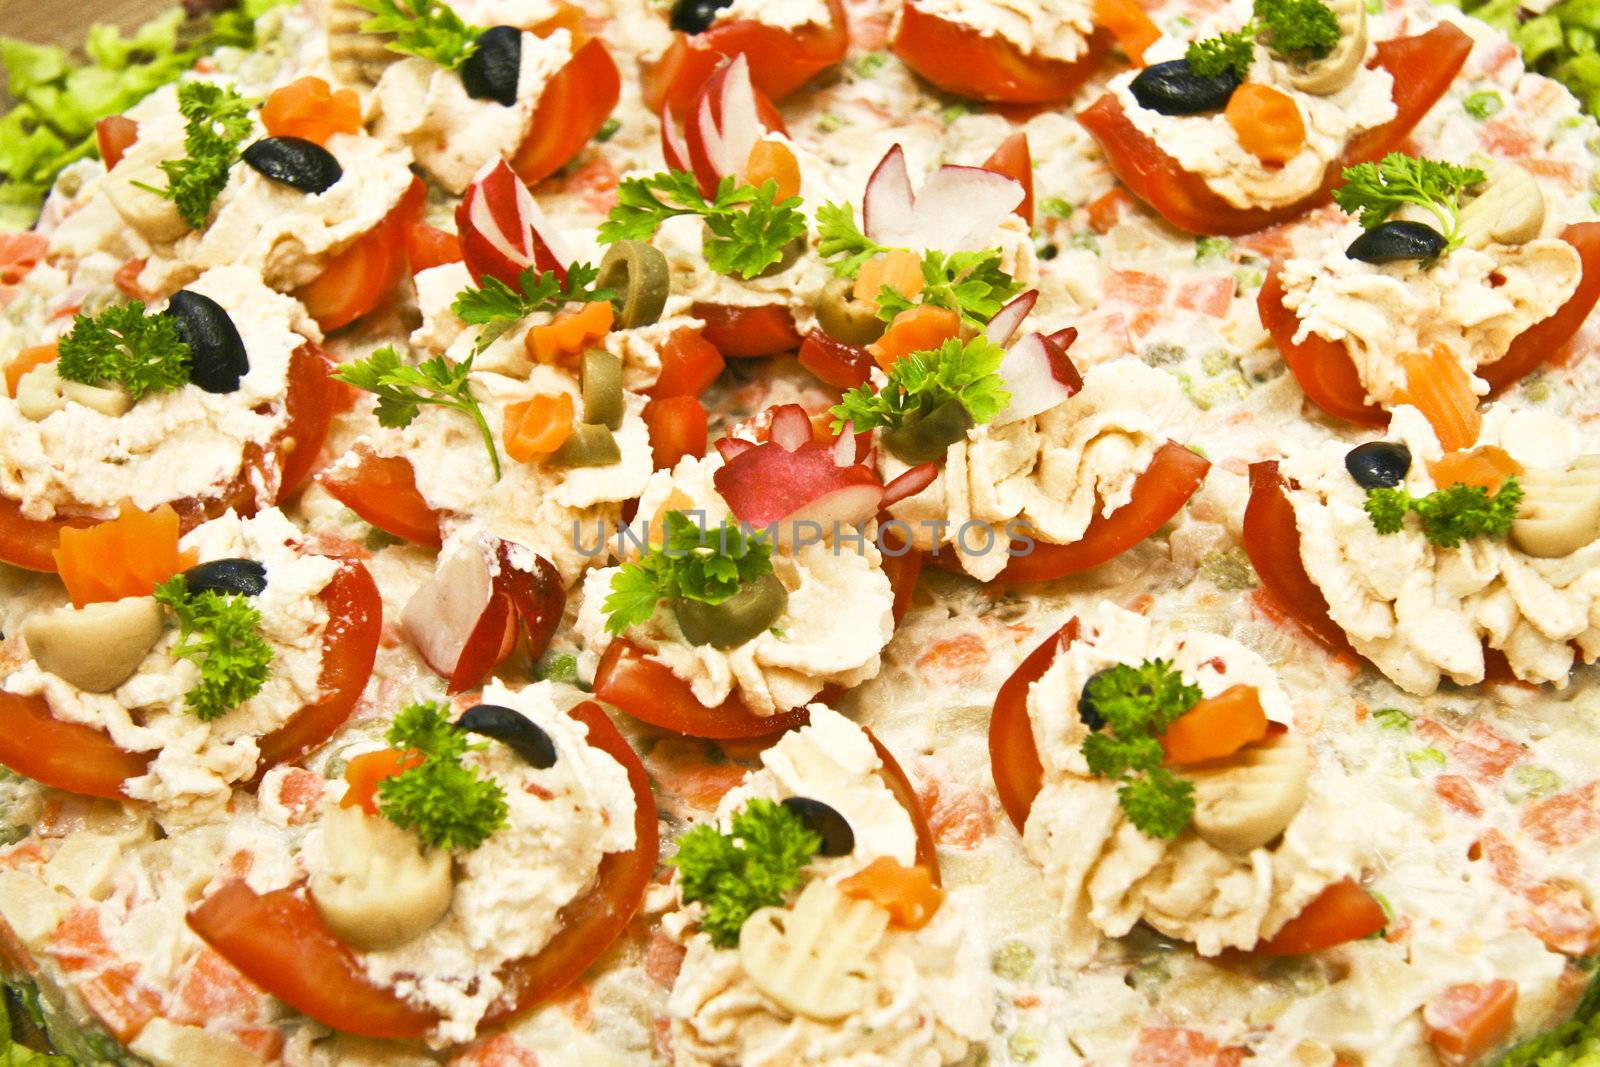 Detail of the salad from the catering buffet